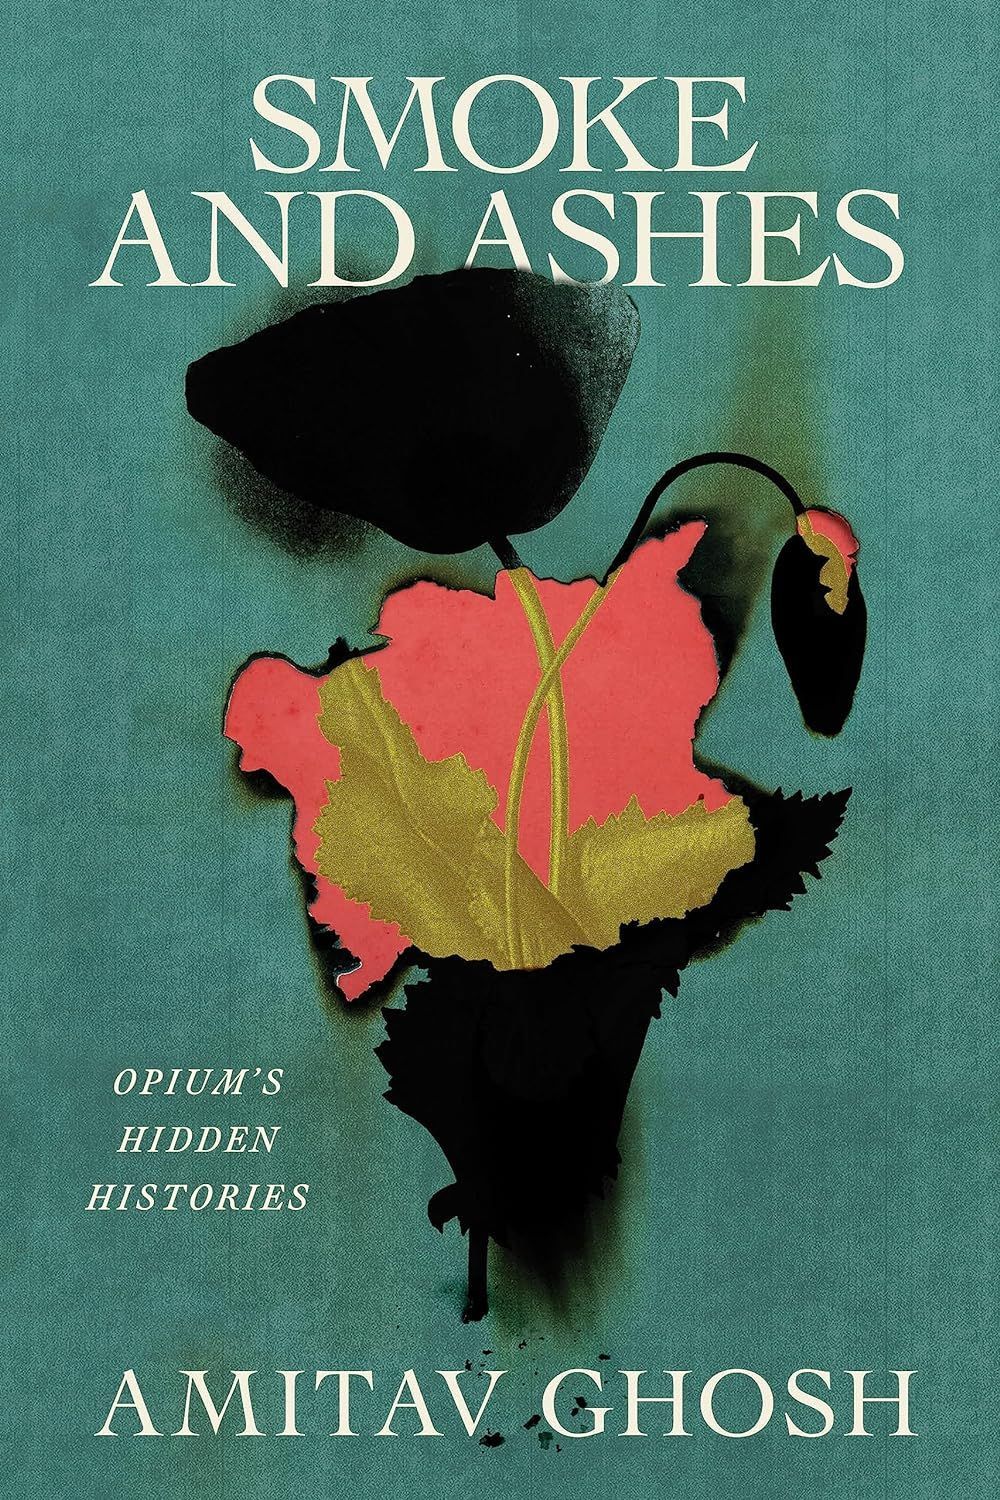 The Butcher, the Brewer, the Opium Smuggler: On Amitav Ghosh’s “Smoke and Ashes”